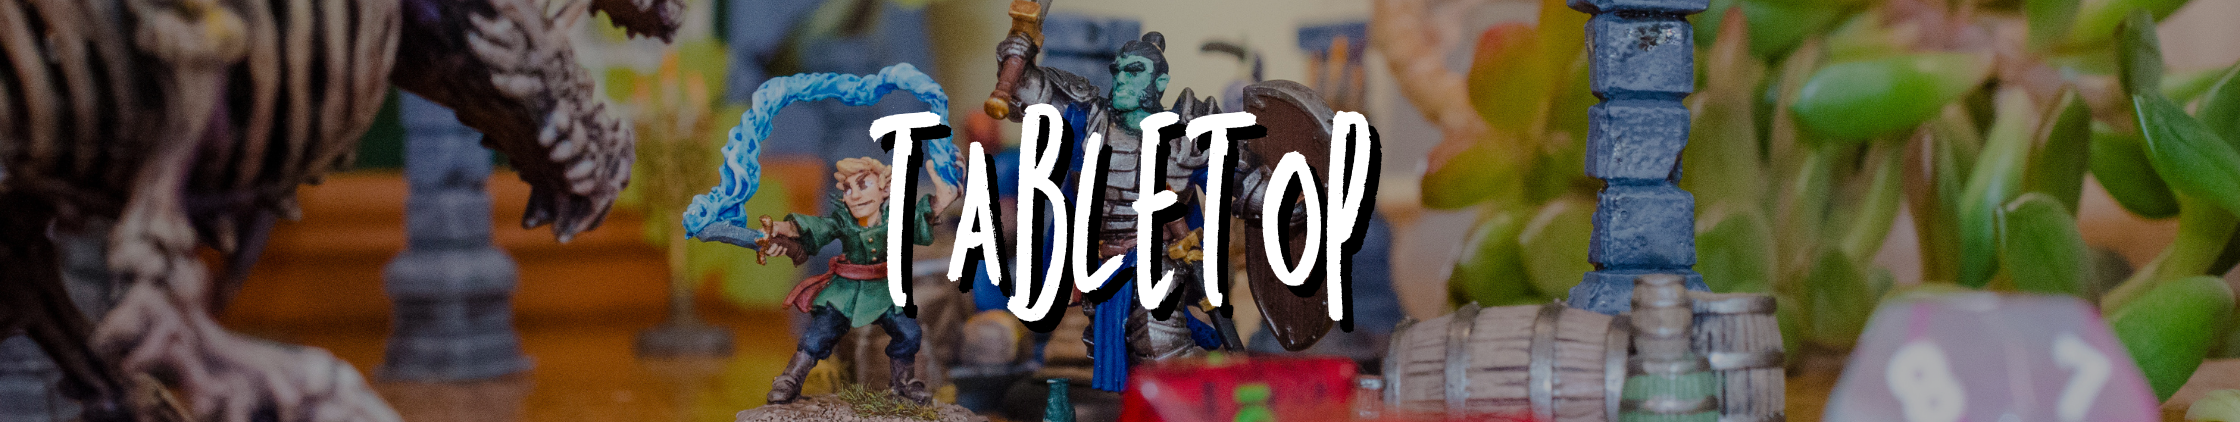 Your one-stop hobby shop for tabletop miniatures, warhammer, gaming supplies and more based out of Victoria BC. We ship Canada-Wide with flat shipping and orders over $150 qualify for free shipping!